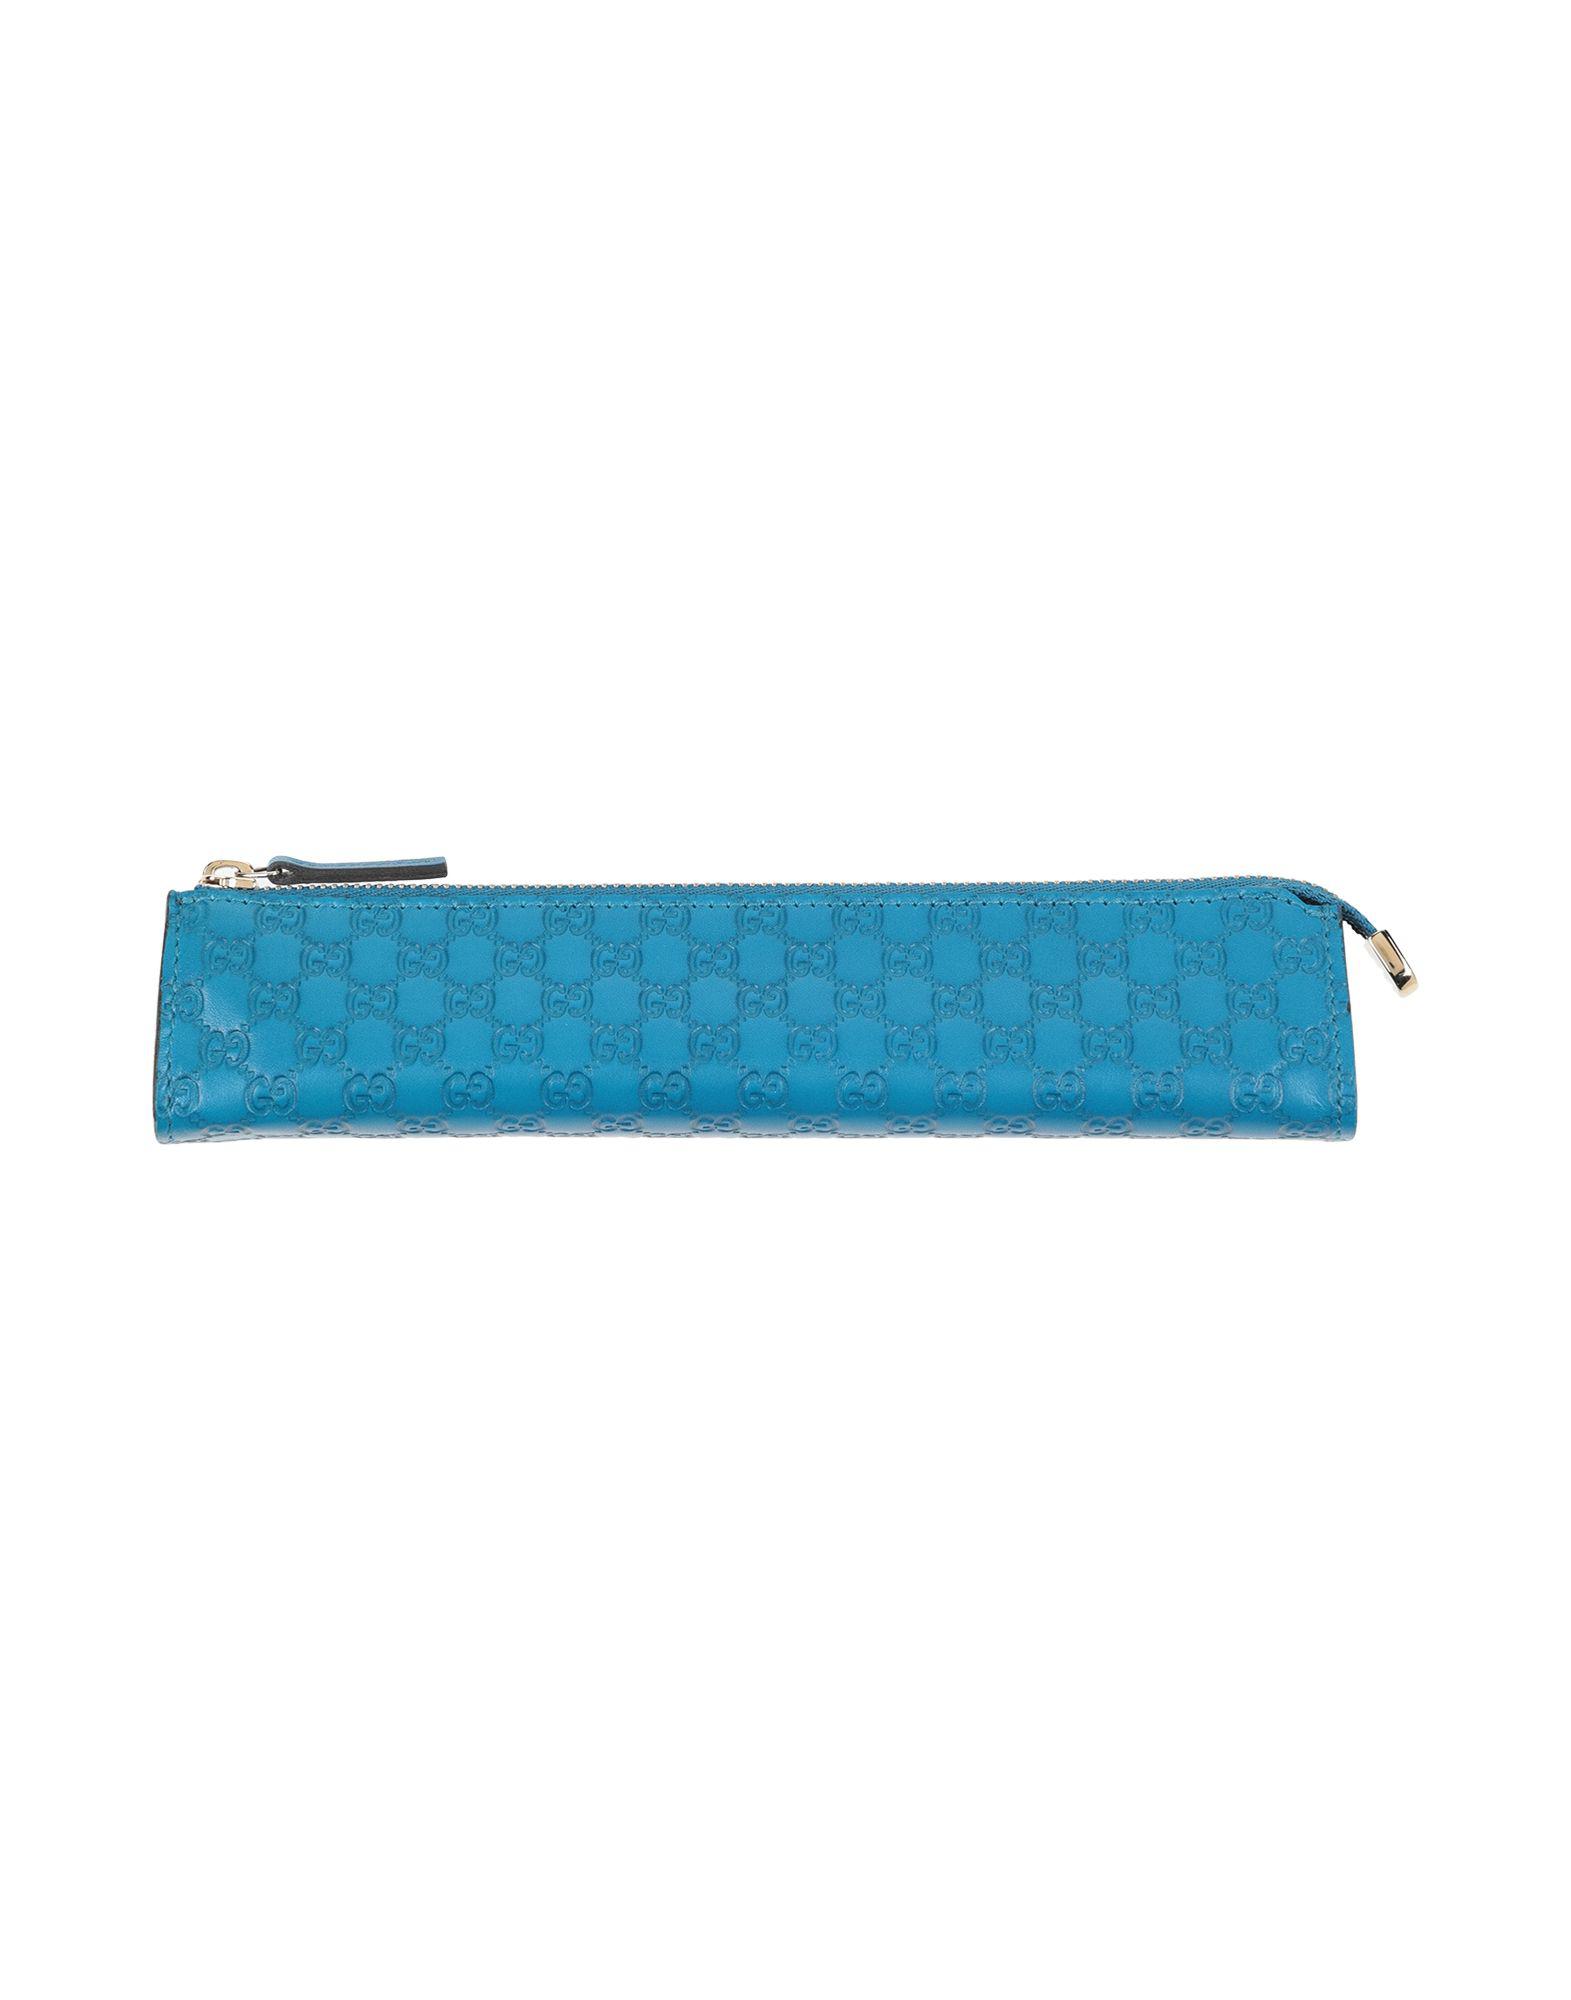 Gucci Leather Pencil Case in Deep Jade - Lyst